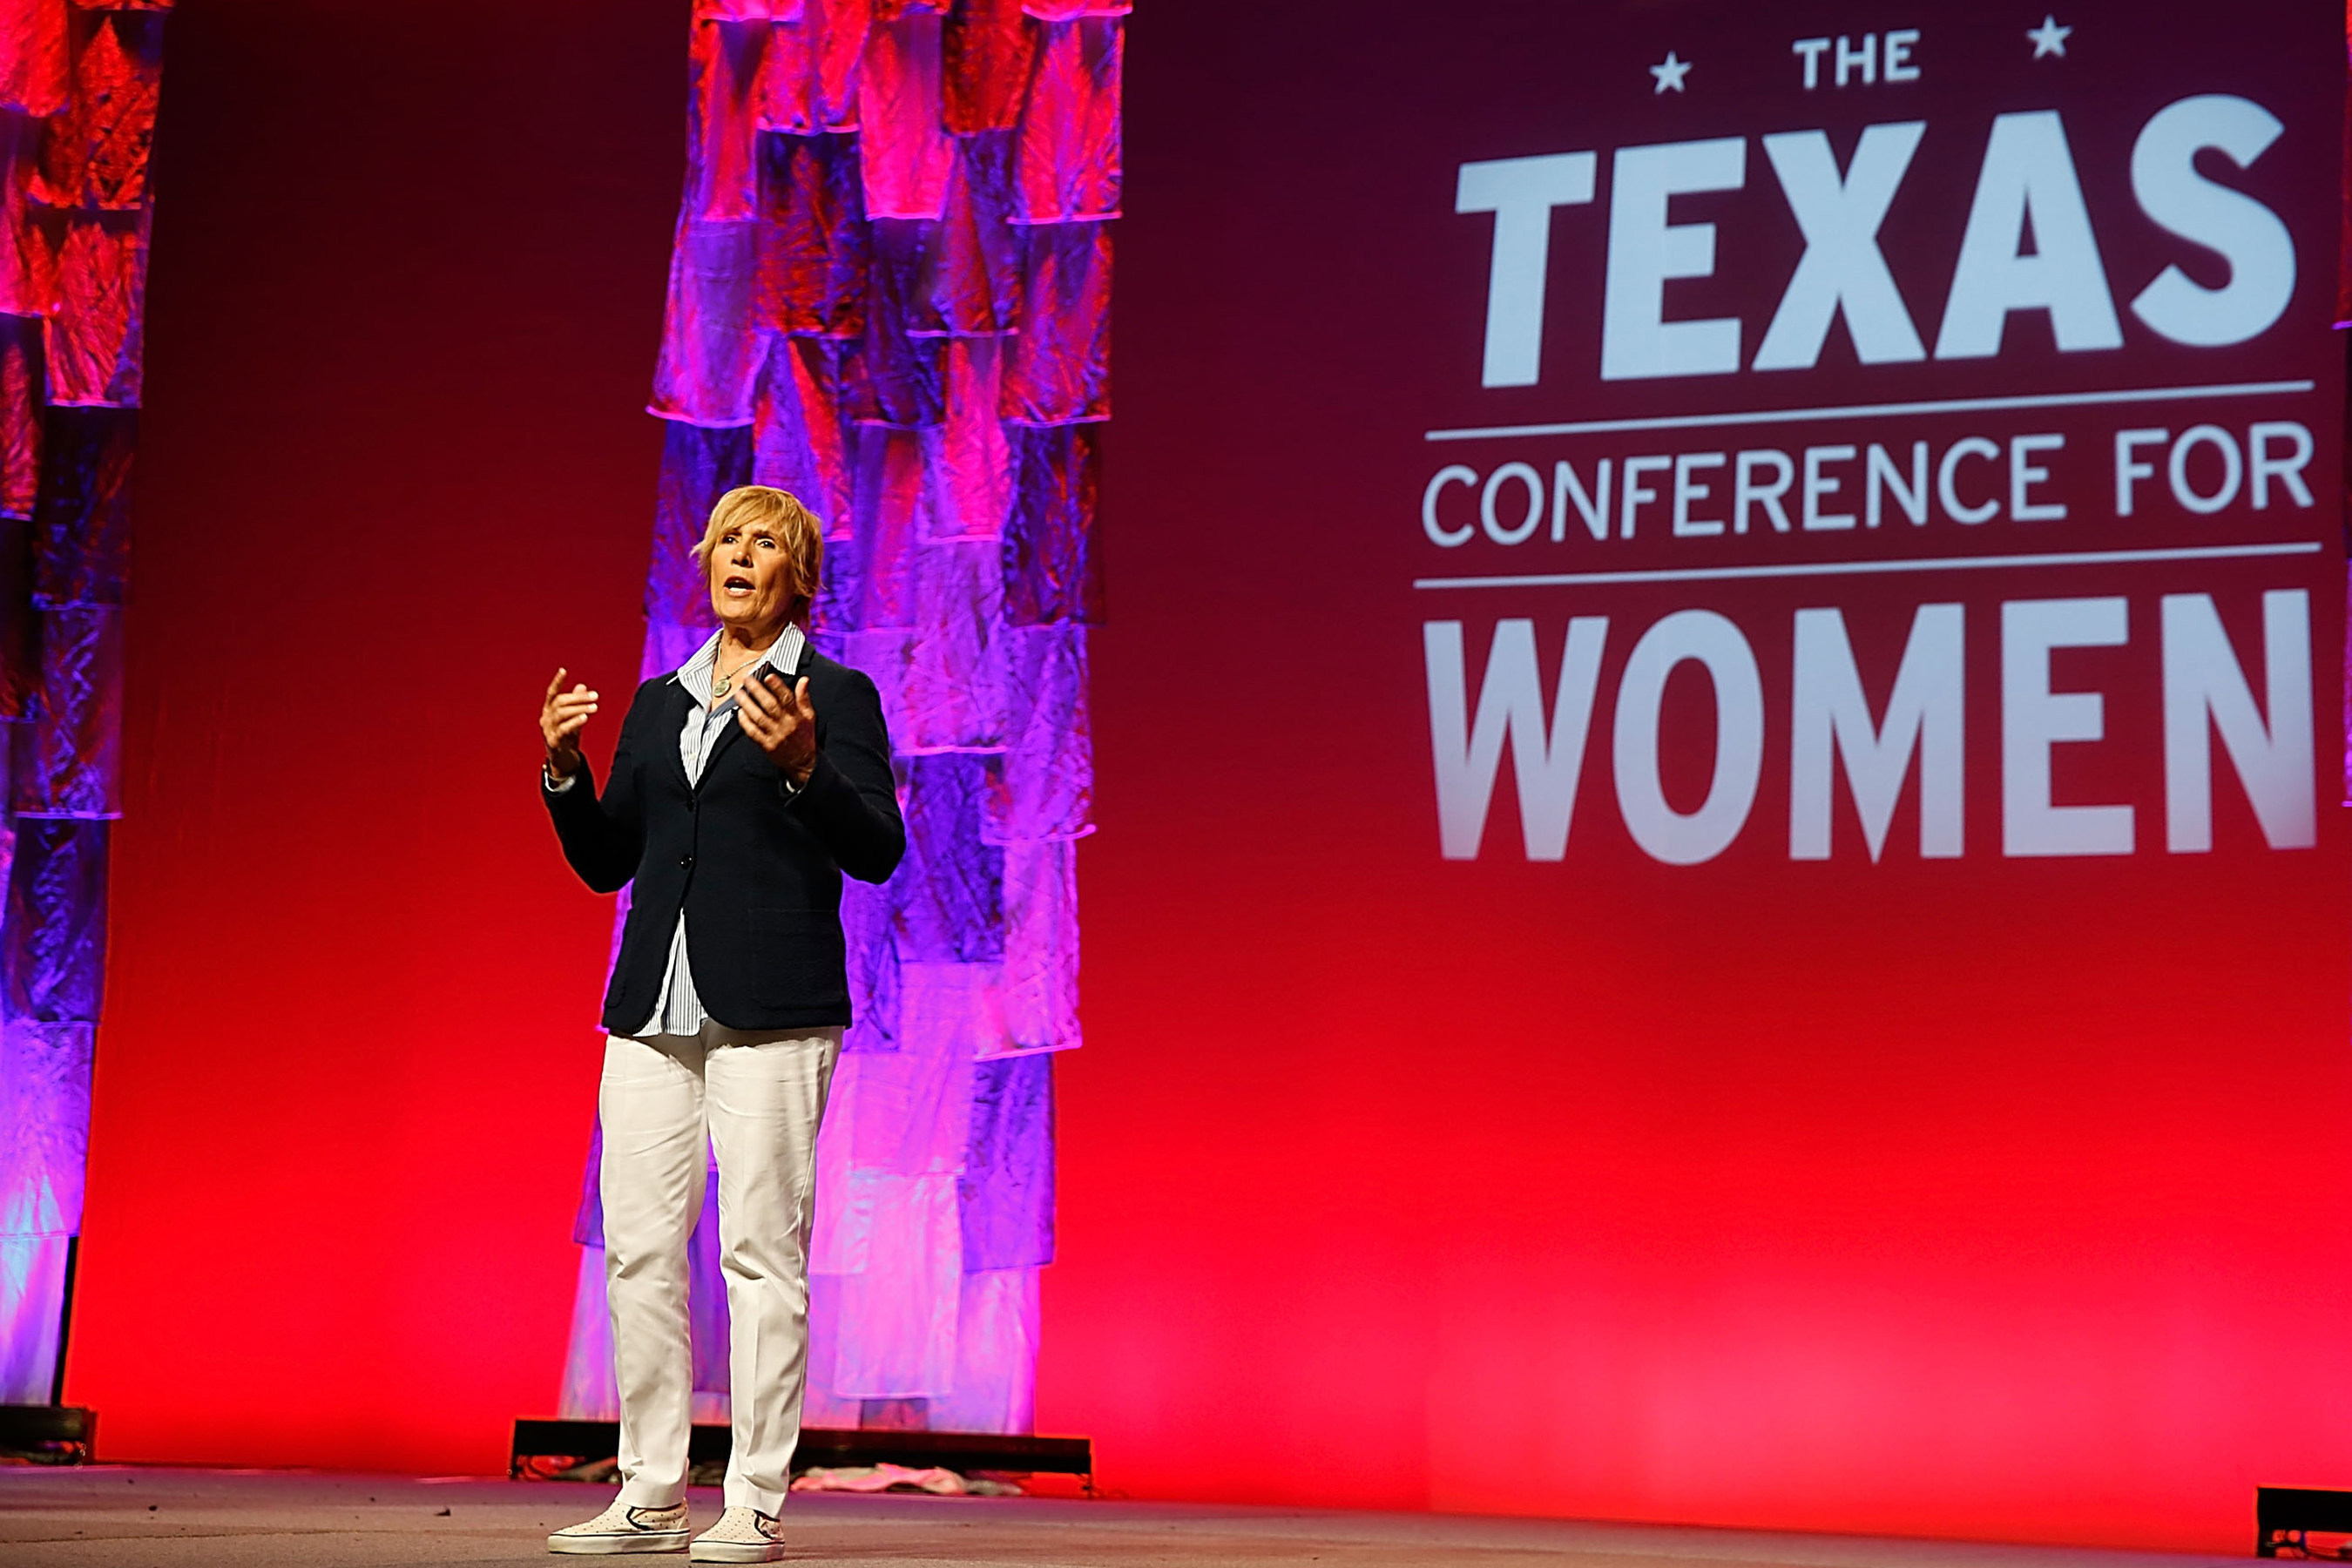 Diana Nyad, record-breaking endurance swimmer, addresses 6,000 attendees at the 2014 Texas Conference for Women.